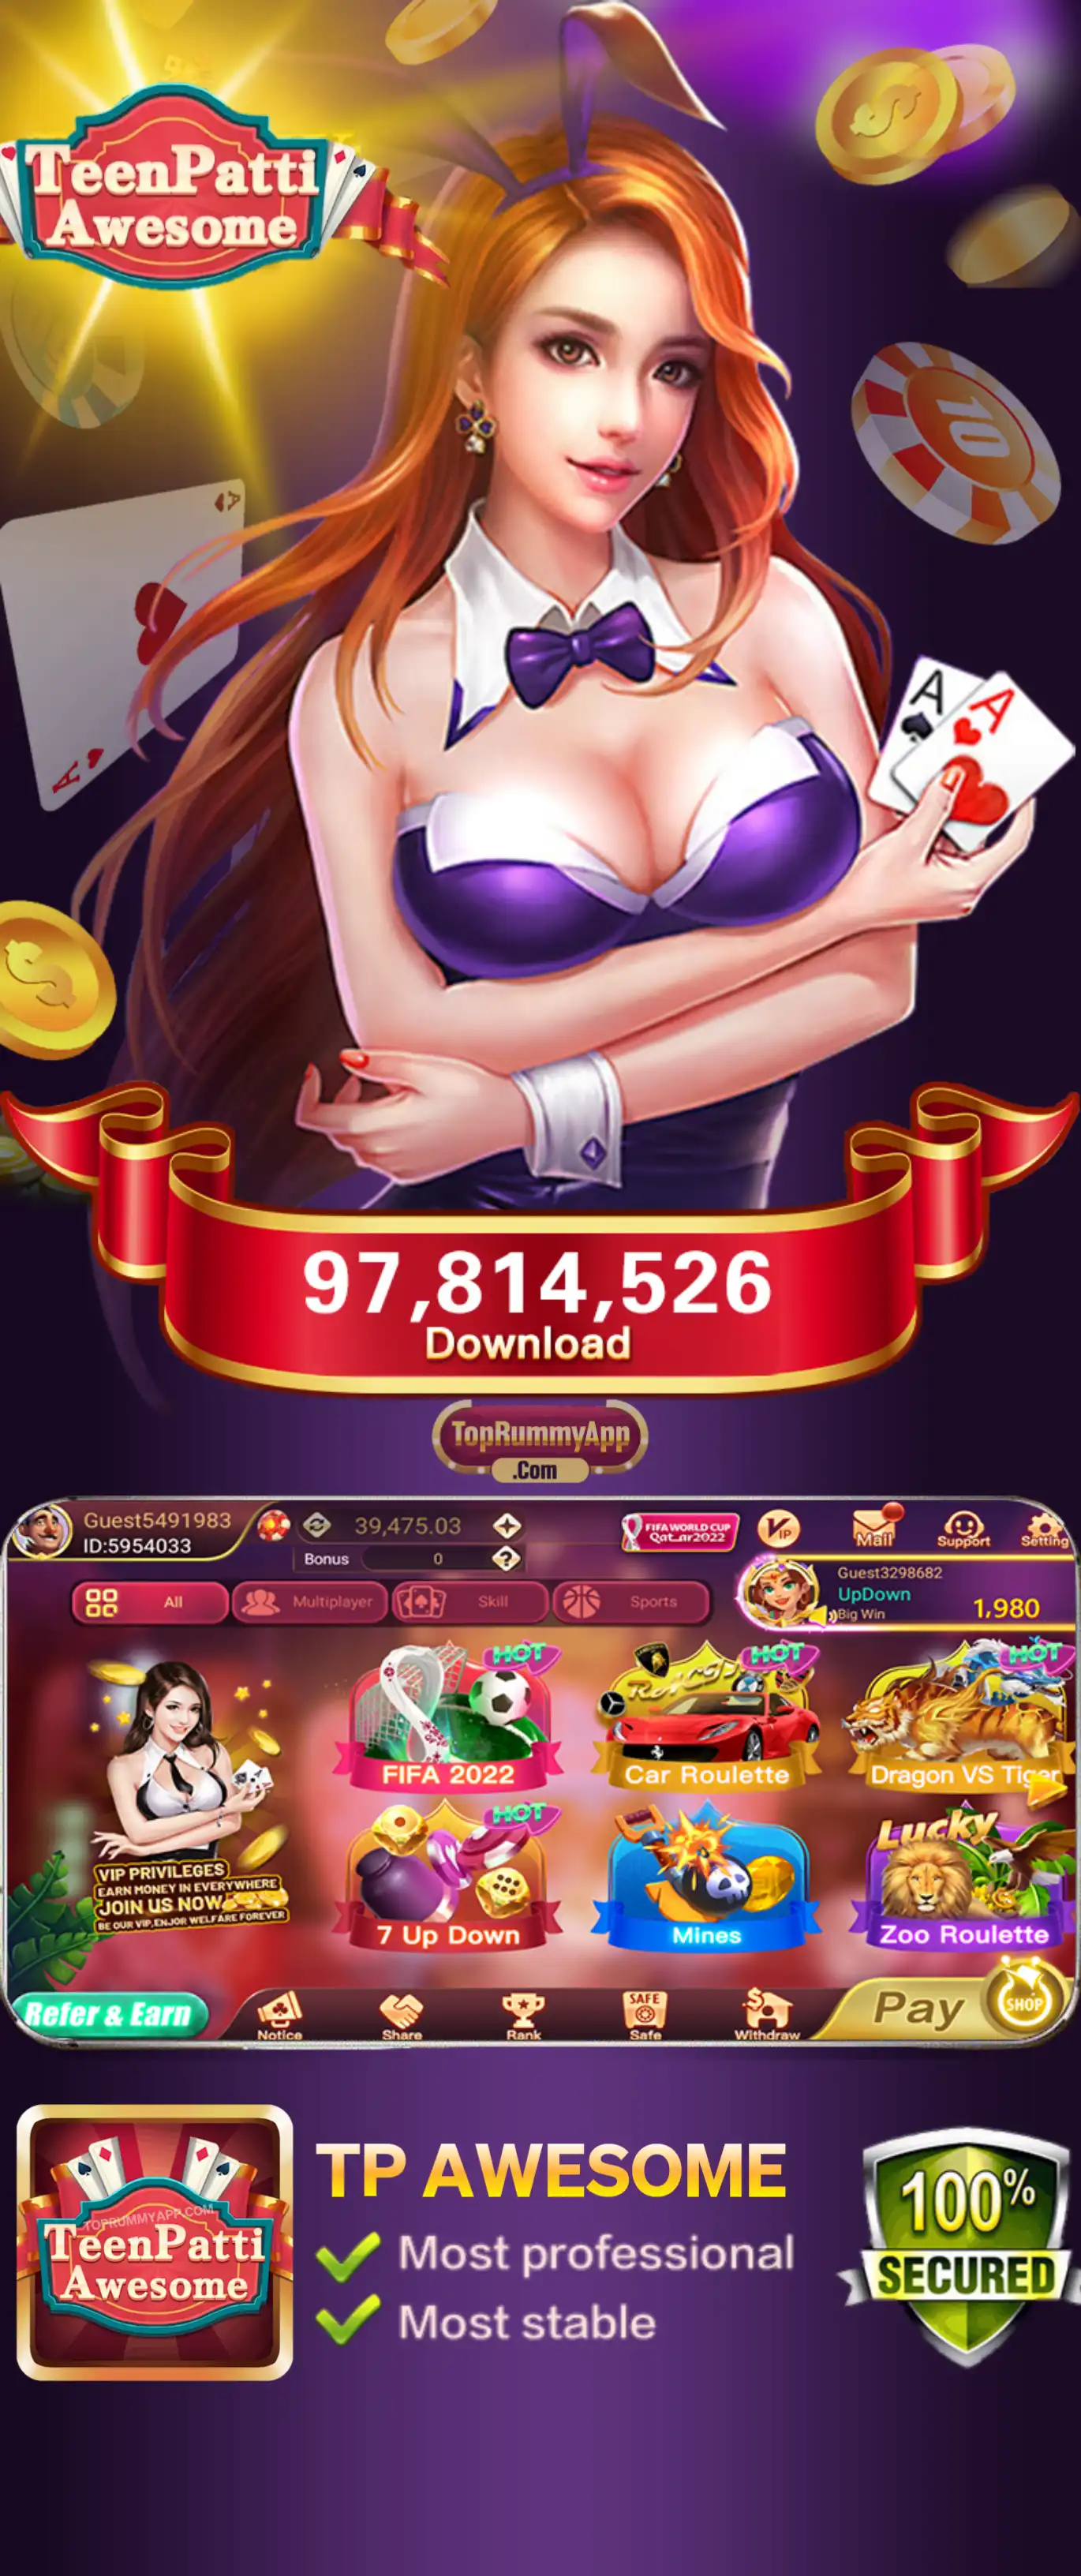 Teen Patti Awesome Apk Download Official